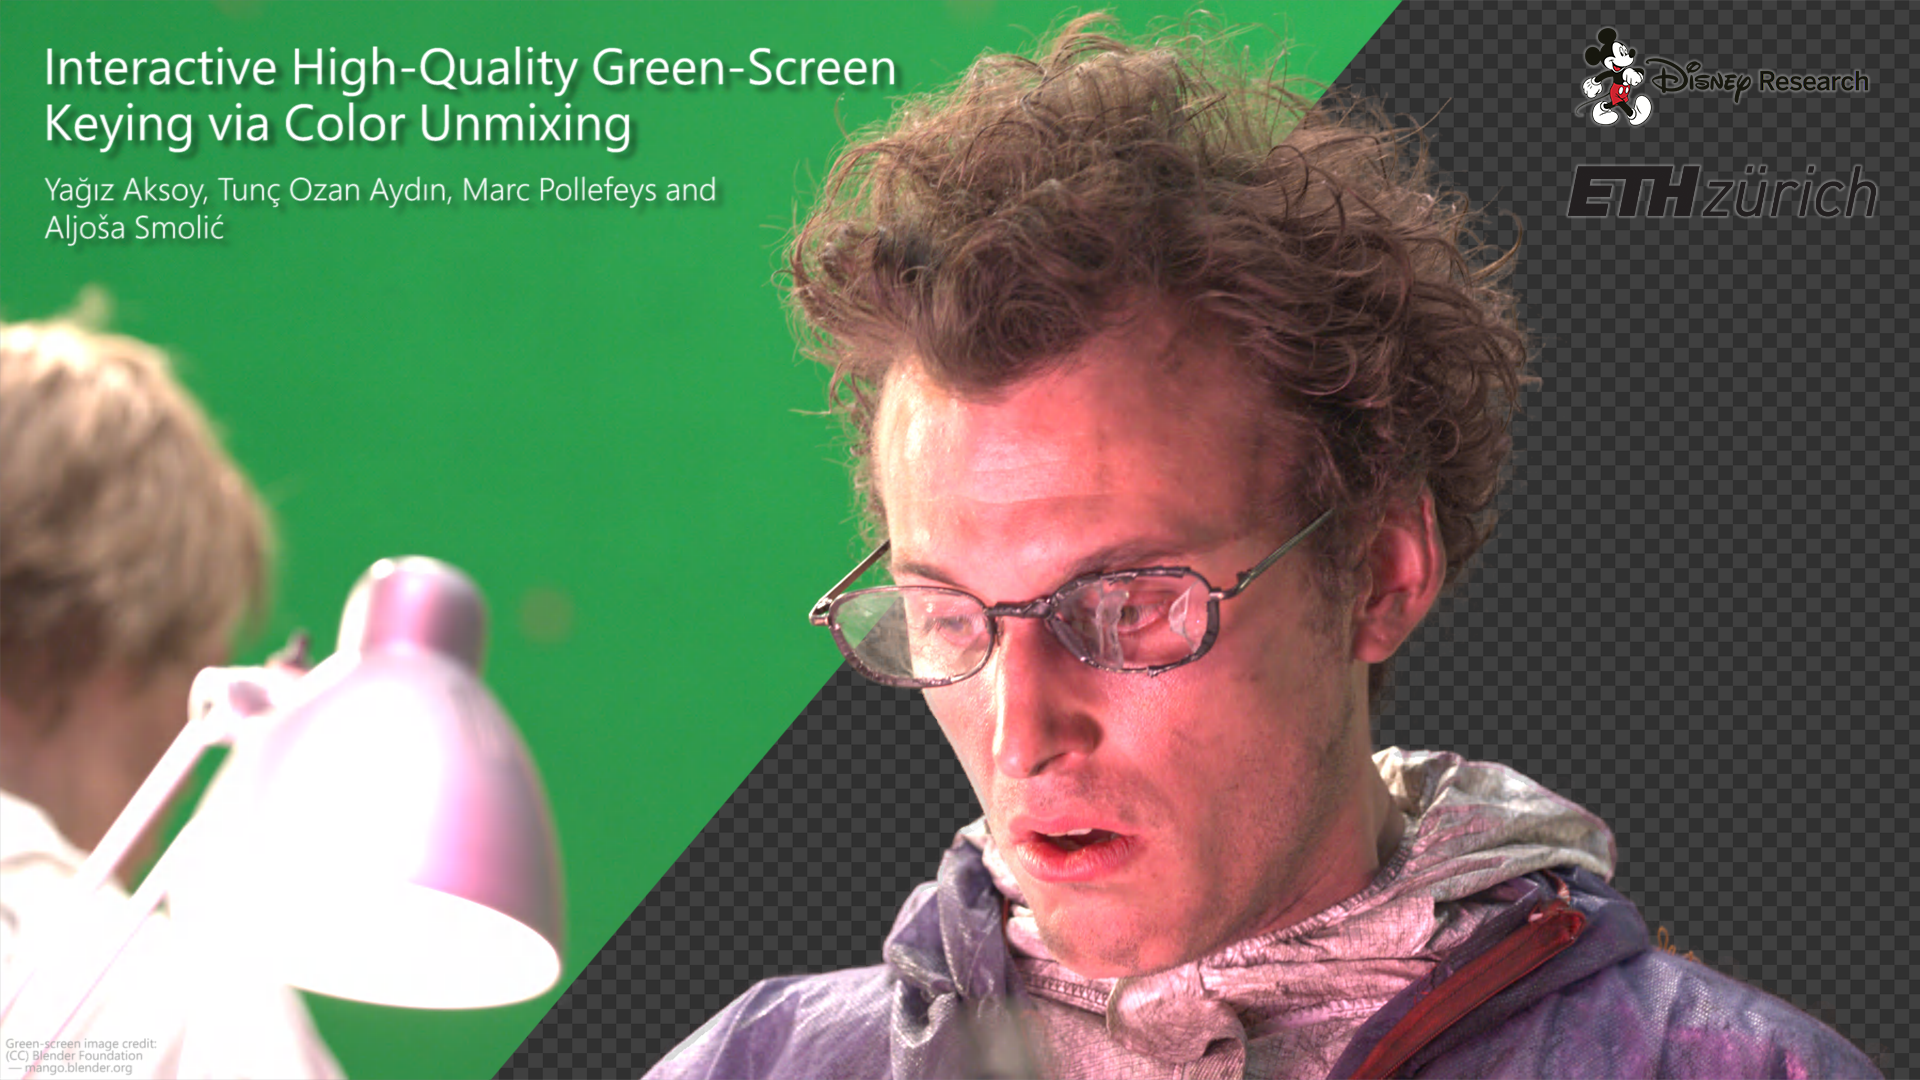 Interactive High-Quality Green-Screen Keying via Color Unmixing-Image